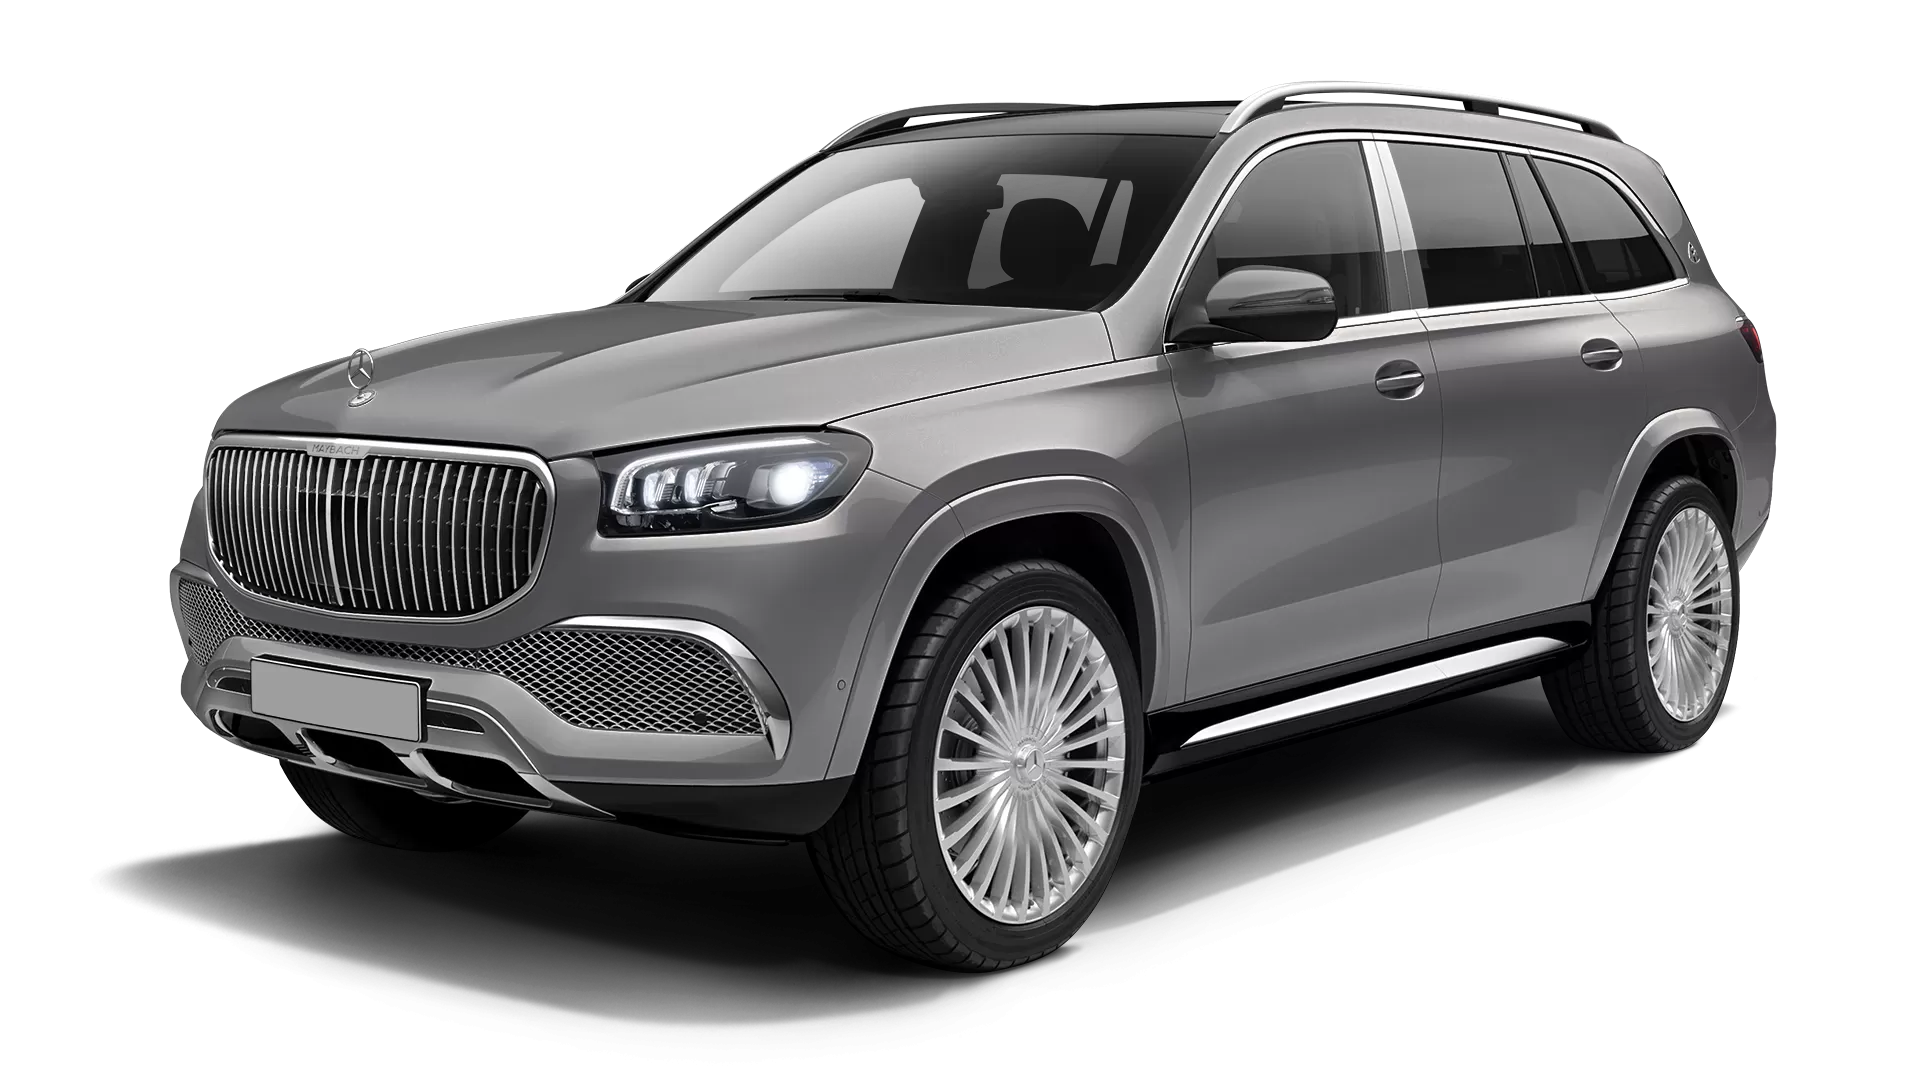 Mercedes Maybach GLS 600 stock front view in Mojave Silver color